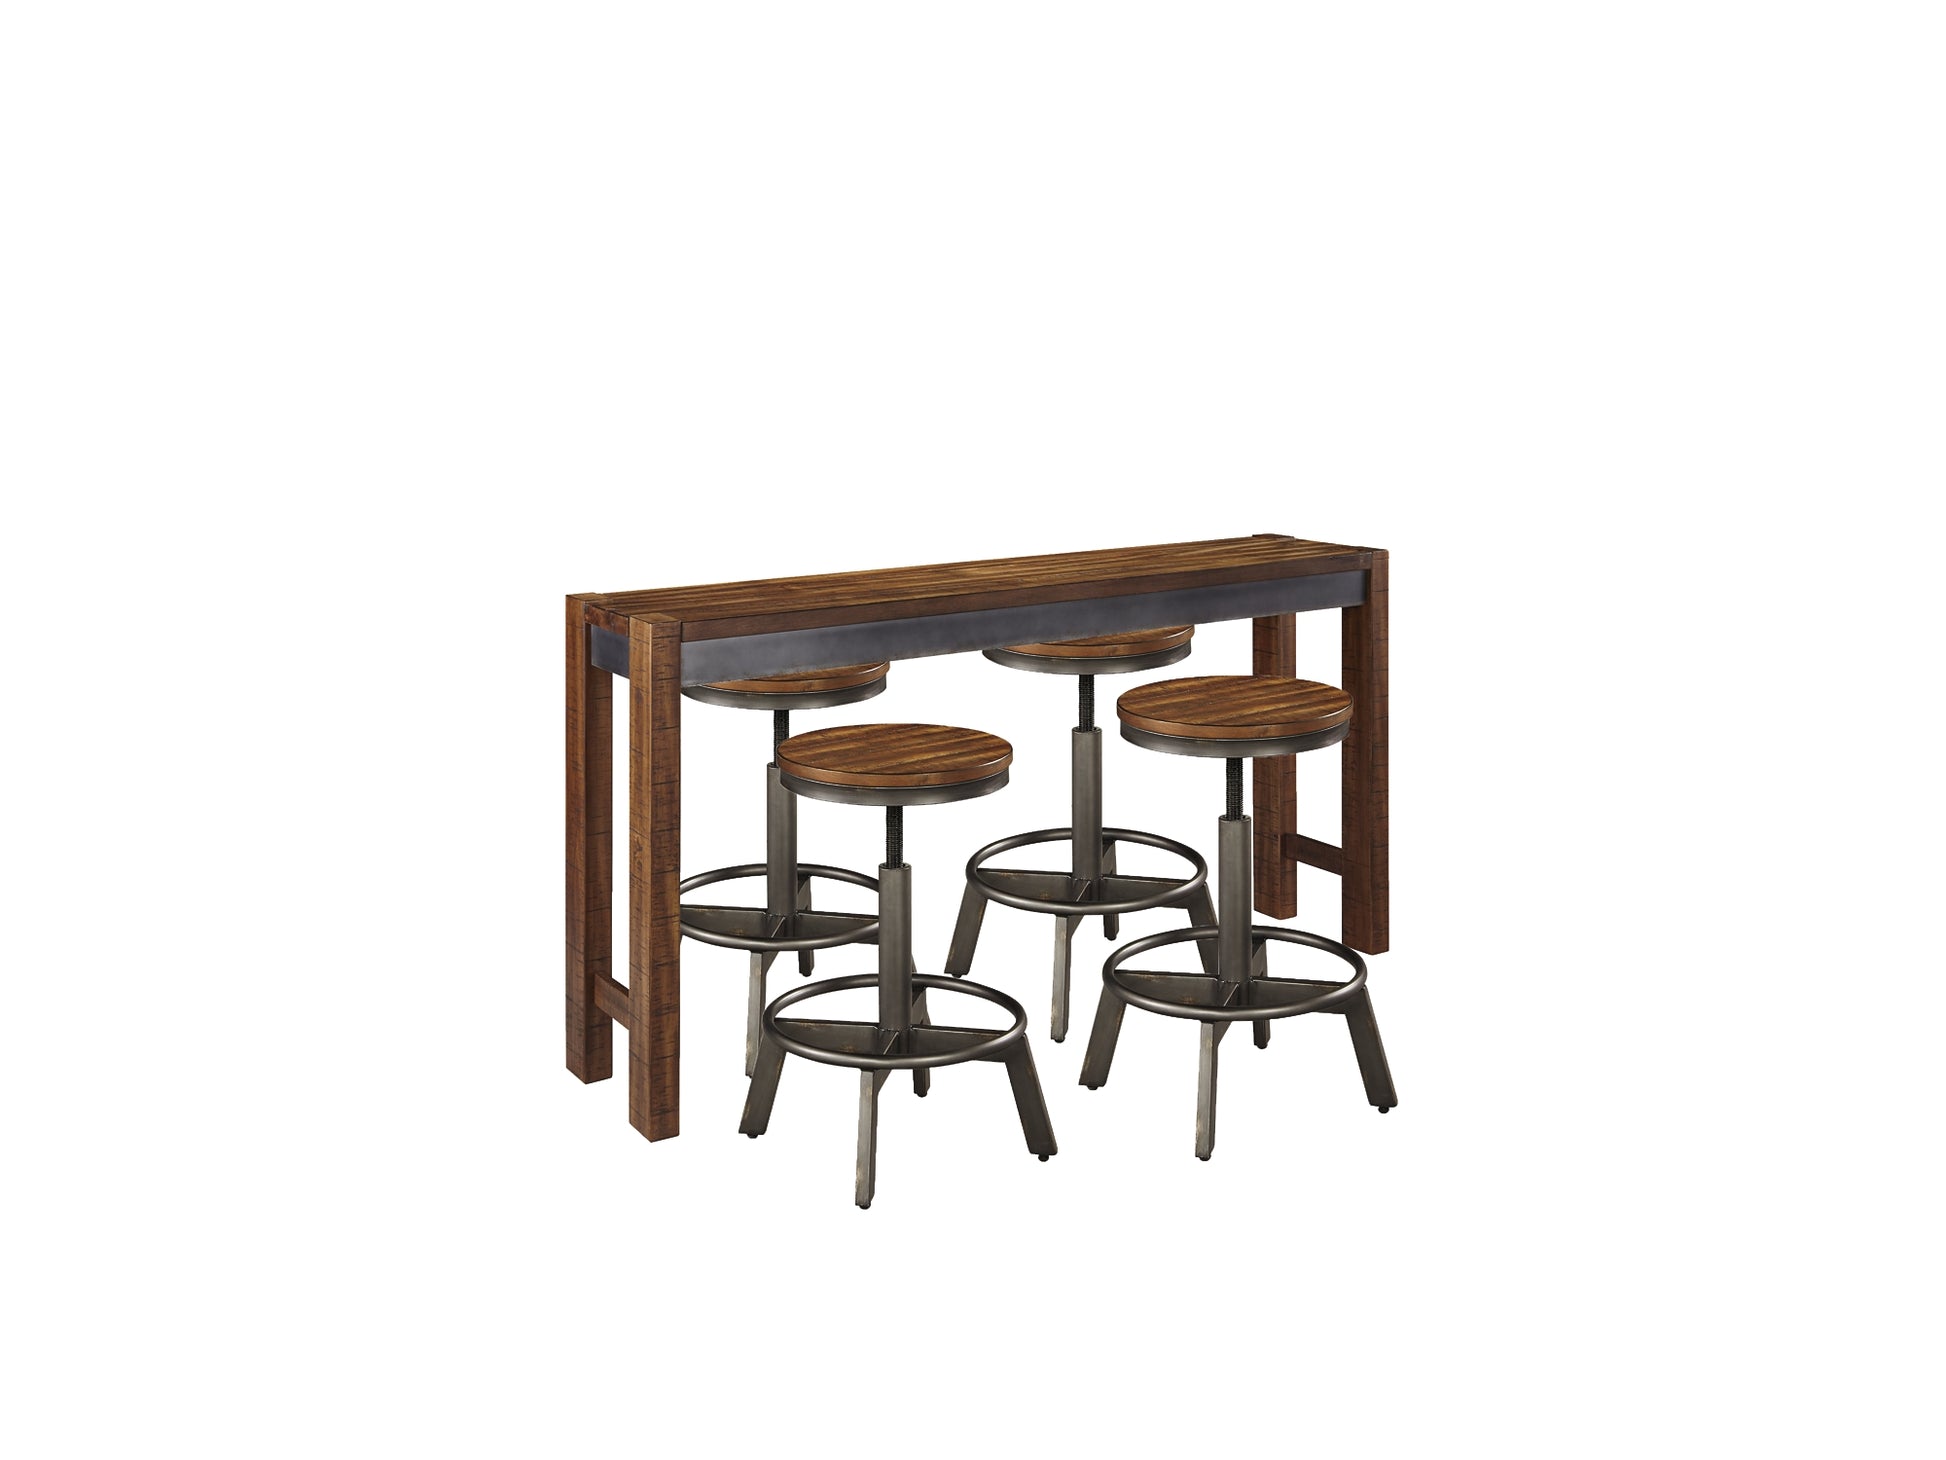 Torjin Counter Height Dining Table and 4 Barstools Wilson Furniture (OH)  in Bridgeport, Ohio. Serving Moundsville, Richmond, Smithfield, Cadiz, & St. Clairesville